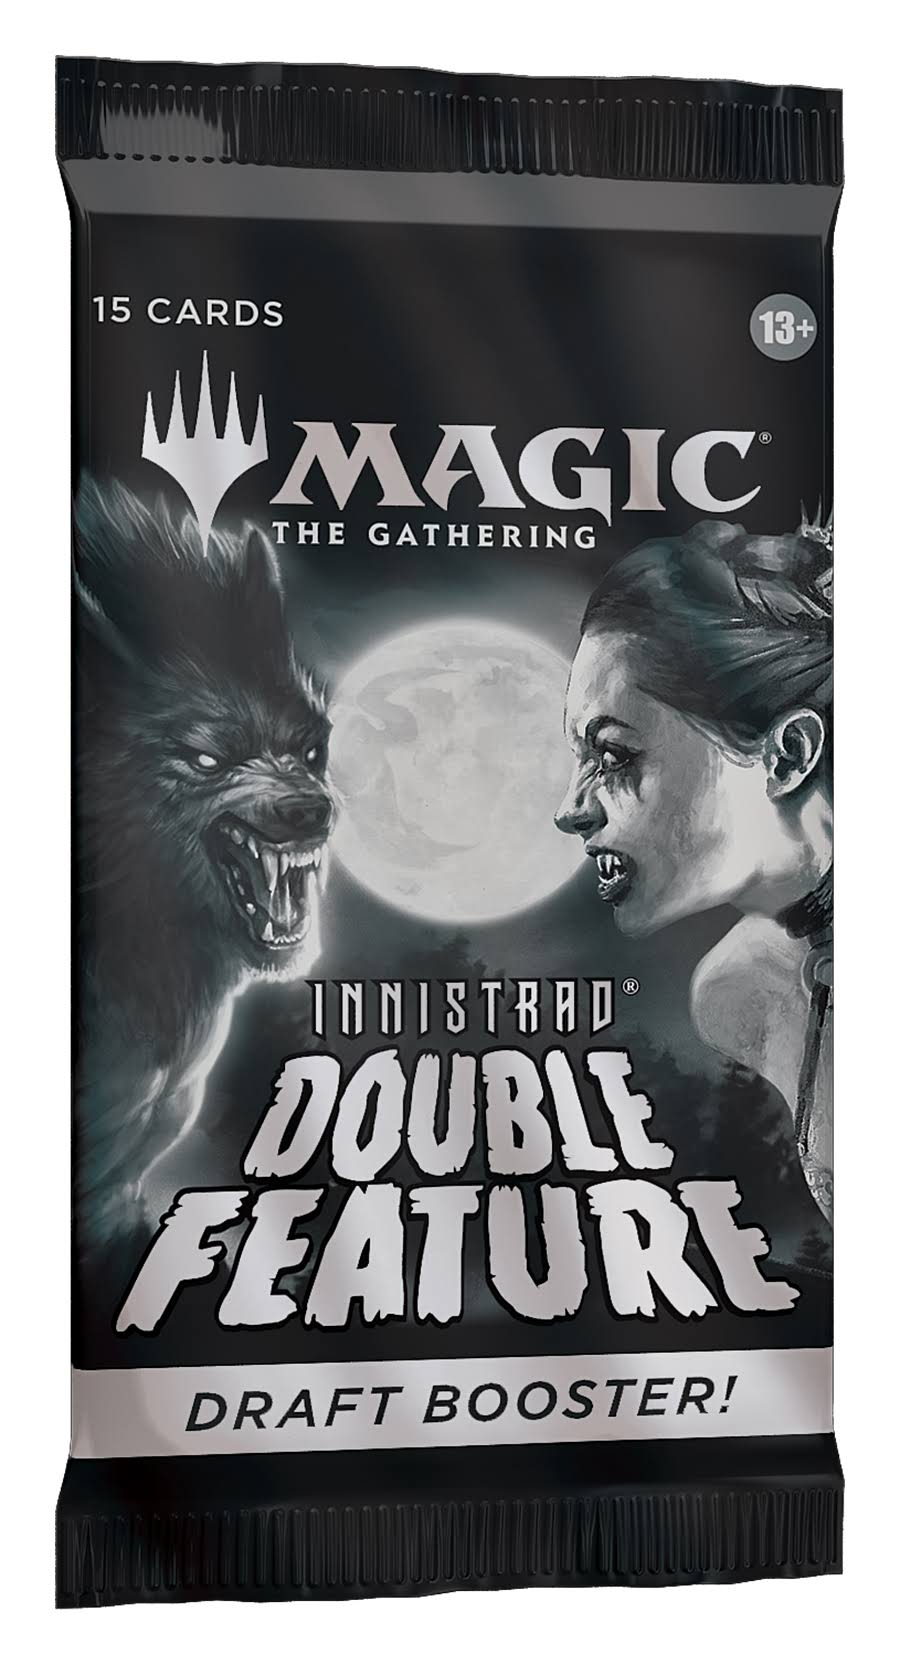 Magic the Gathering: Innistrad Double Feature Draft Booster Pack